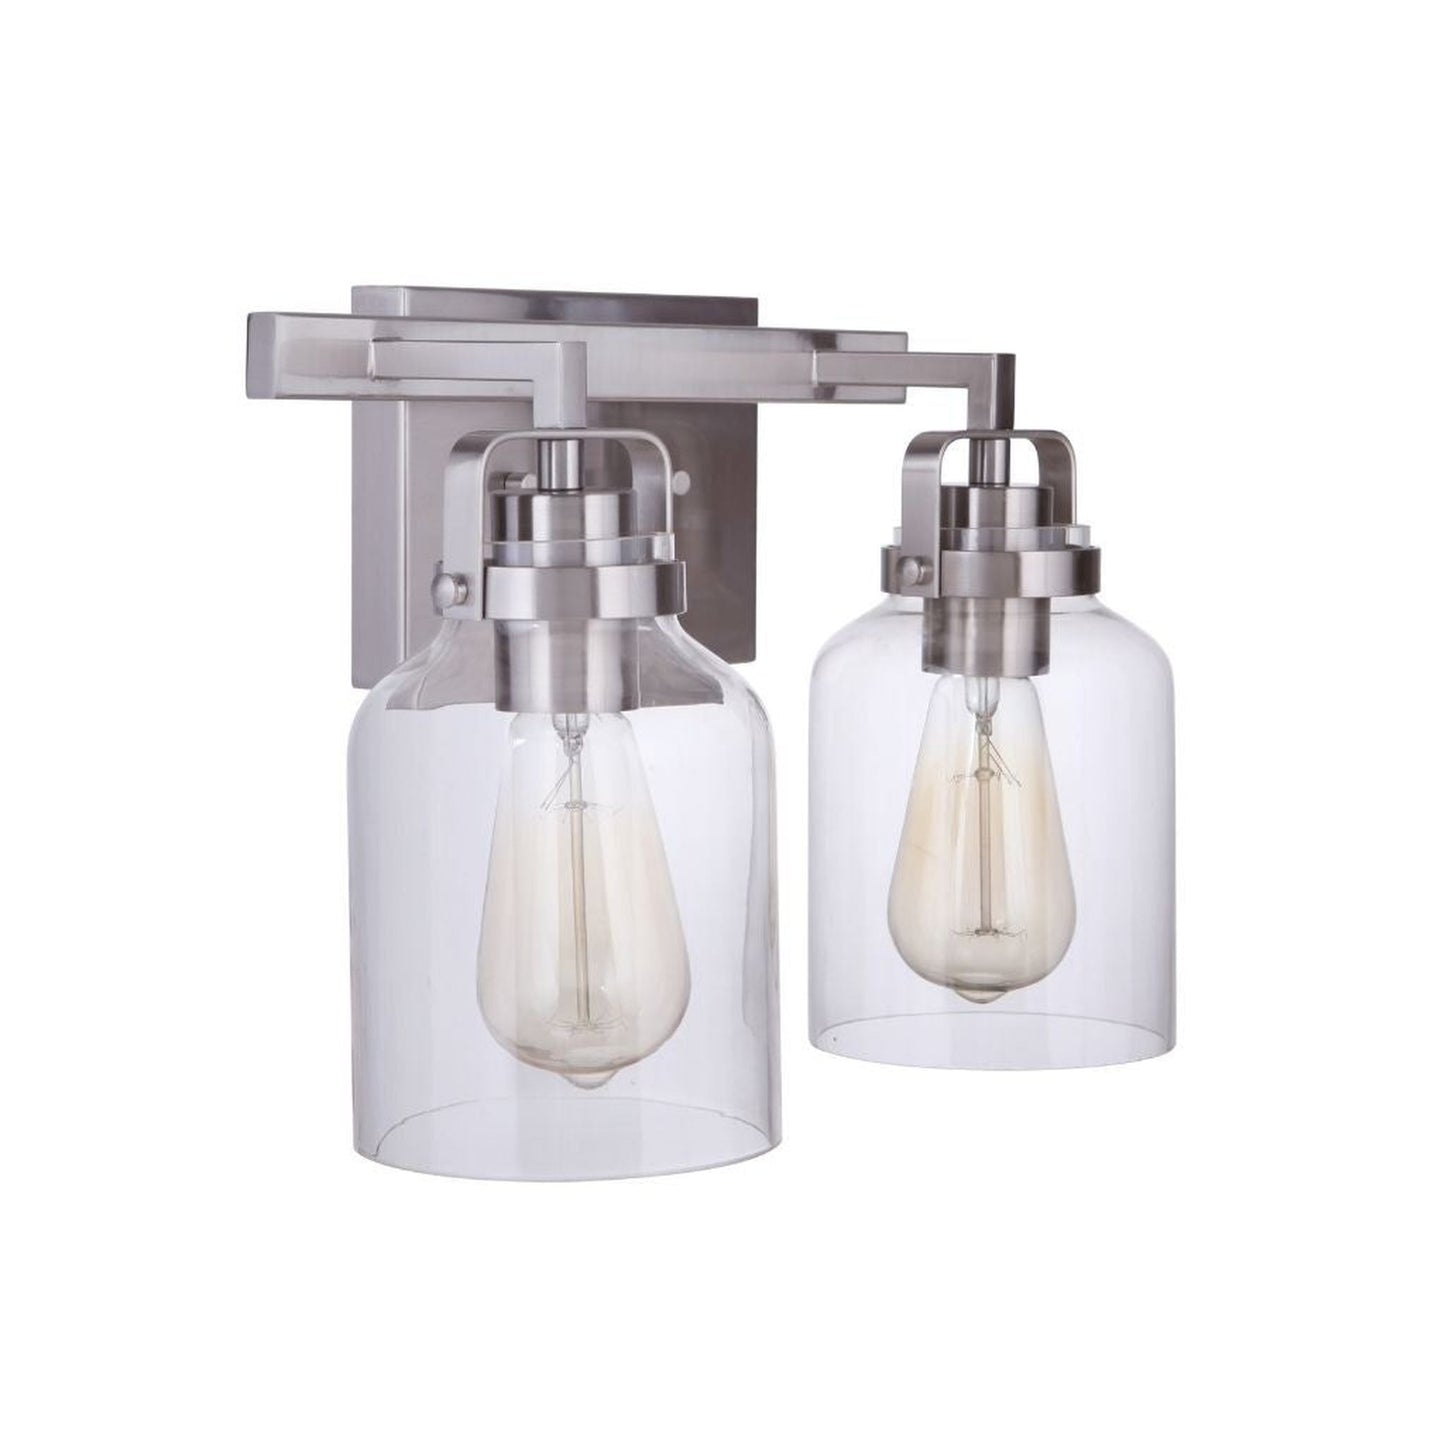 Craftmade Foxwood 13" 2-Light Brushed Polished Nickel Vanity Light With Clear Glass Shades